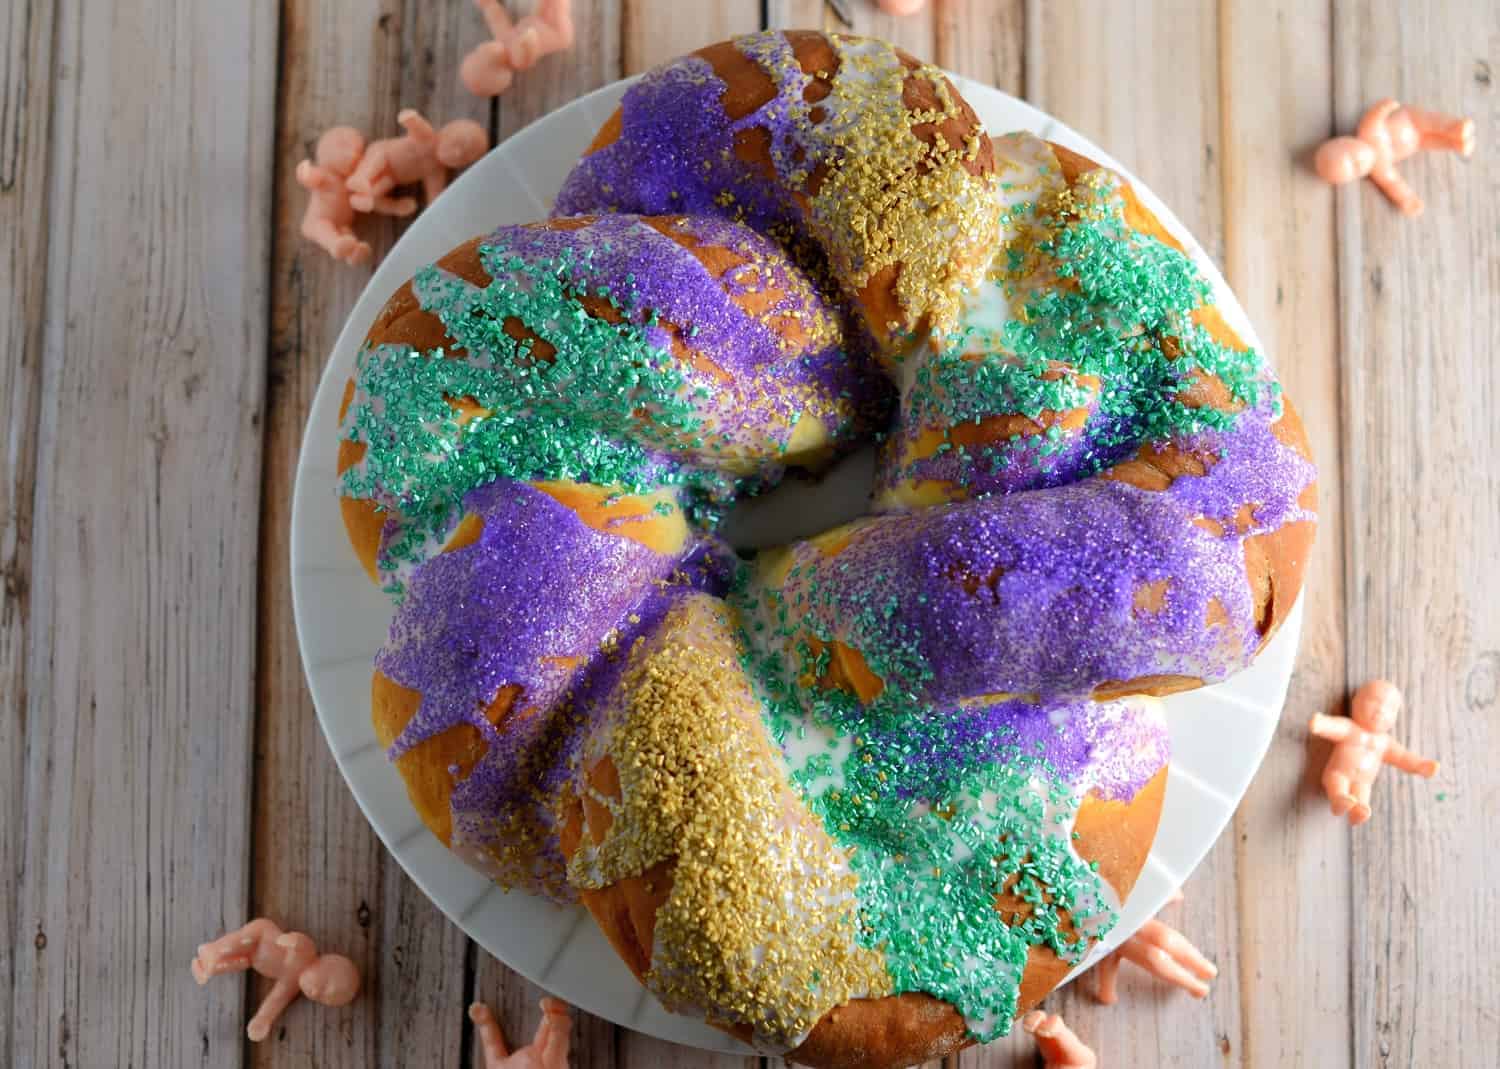 Mardi Gras King Cake Recipe - A giant sweet roll stuffed with brown sugar, raisins and pecans and decorated with icing and purple, green and gold sparkling sugar. Perfect for breakfast or dessert during carnival or on Fat Tuesday!